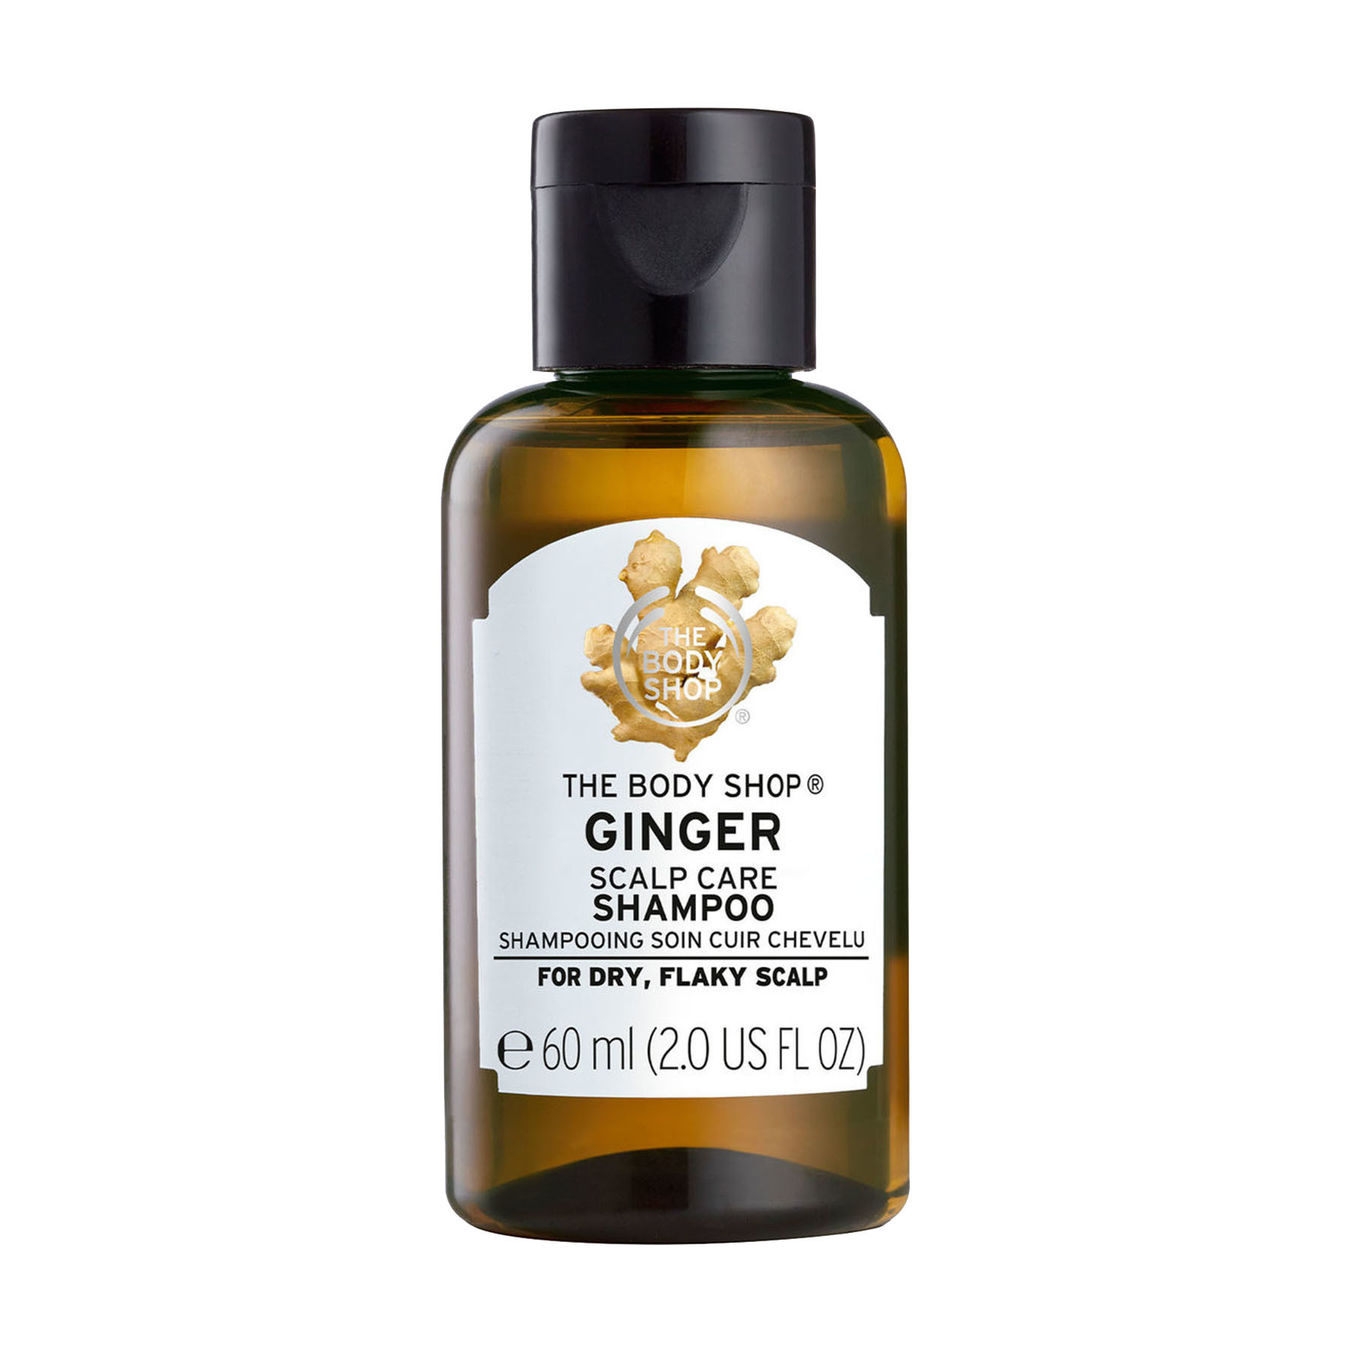 The Body Shop Ginger Sclap Care Shampoo